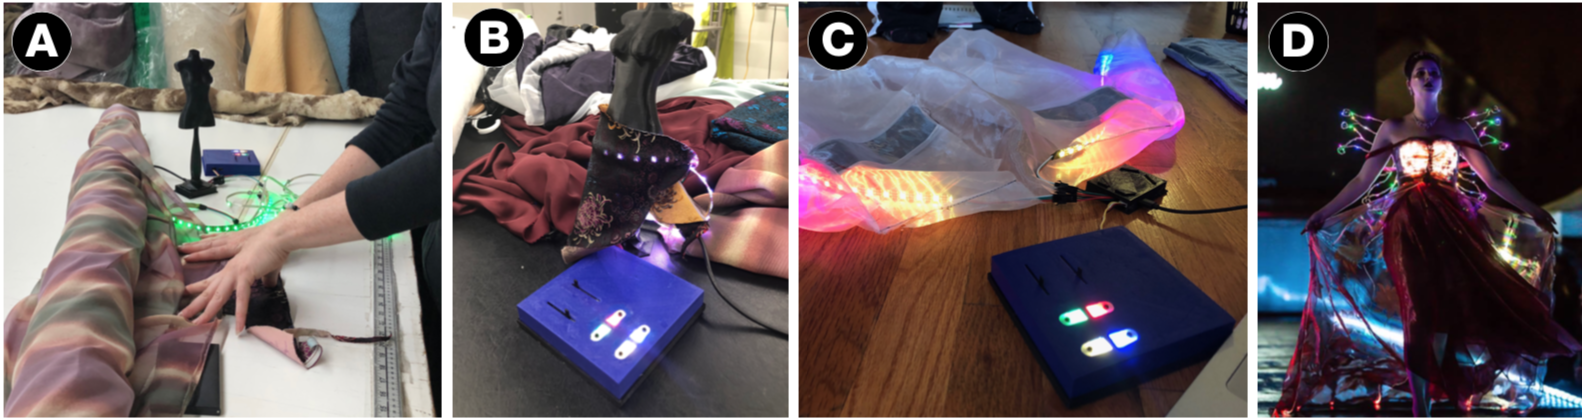 The mannequette is a prototyping platform for electronic fashion garments. It is used in different ways: (a) in-situ, iterating and deciding upon fabrics at a market; (b) for prototyping light (LED) patterns and sensors on a miniature dress form with fabrics by using the mixer; (c) for integrating a previously prototyped and now completed pattern and sensor interactions into an assembled garment; (d) in a completed garment created in a runway show.